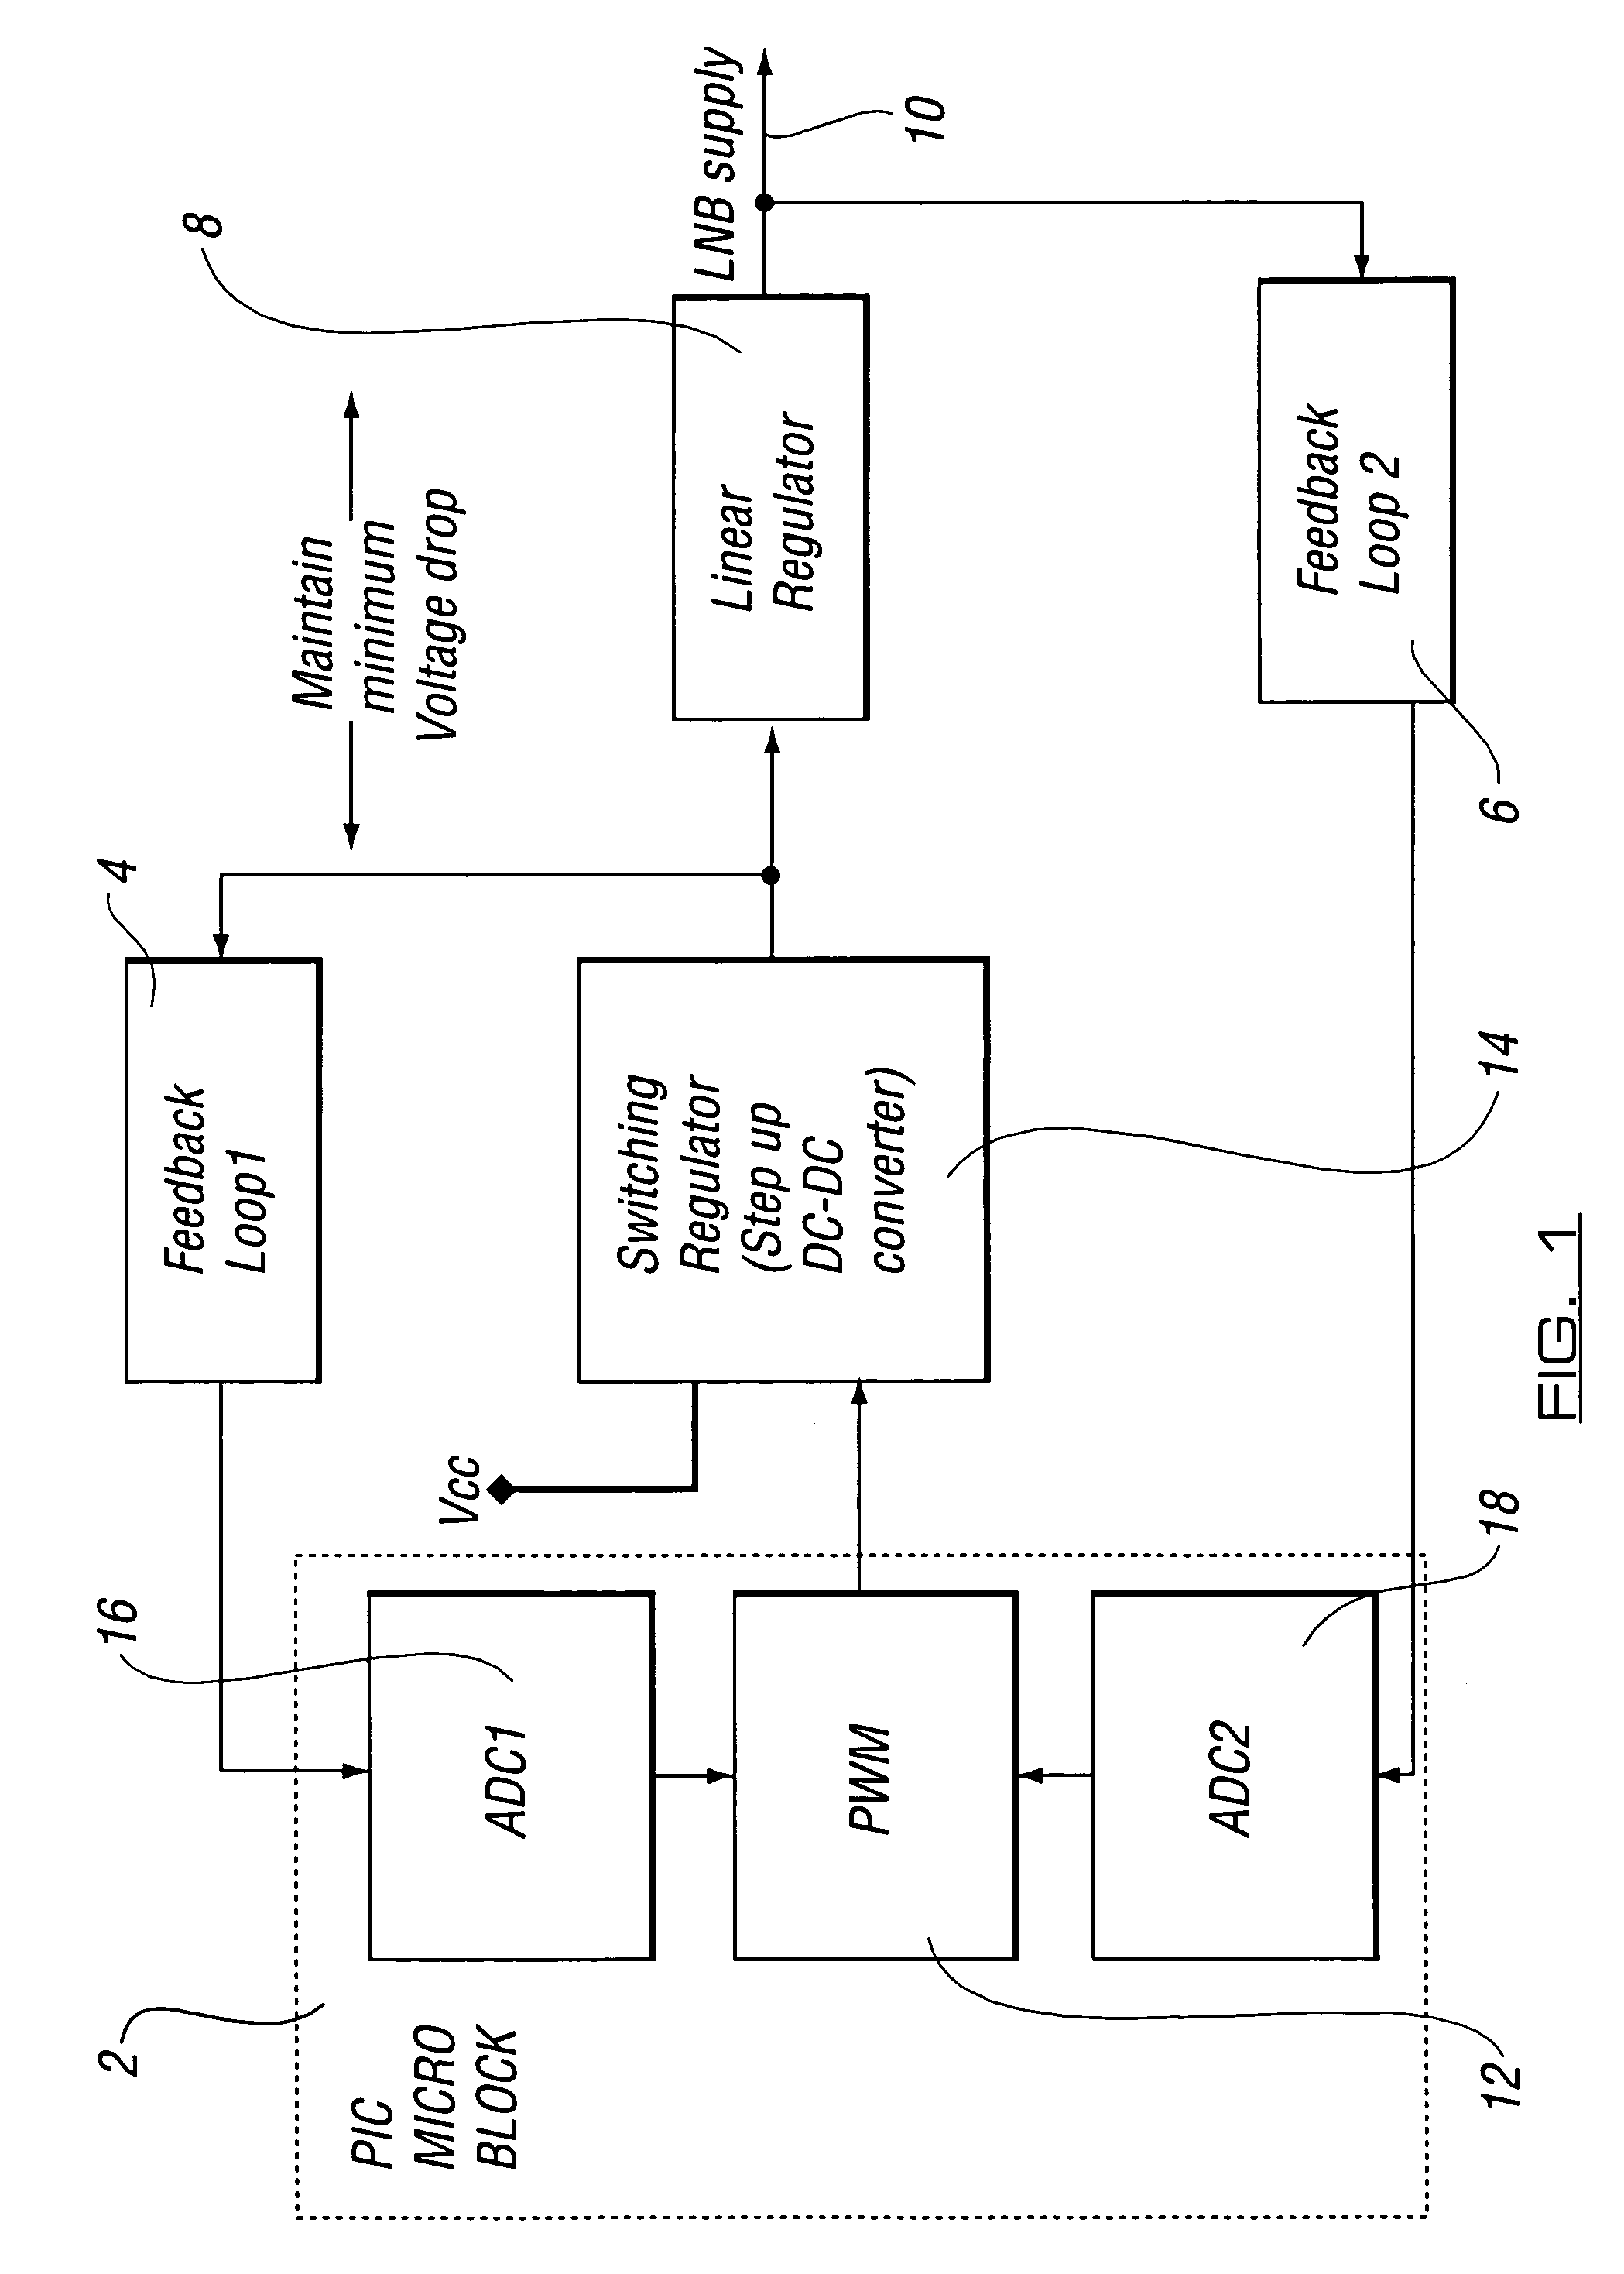 Broadcast data receiver apparatus and method for controlling power supply